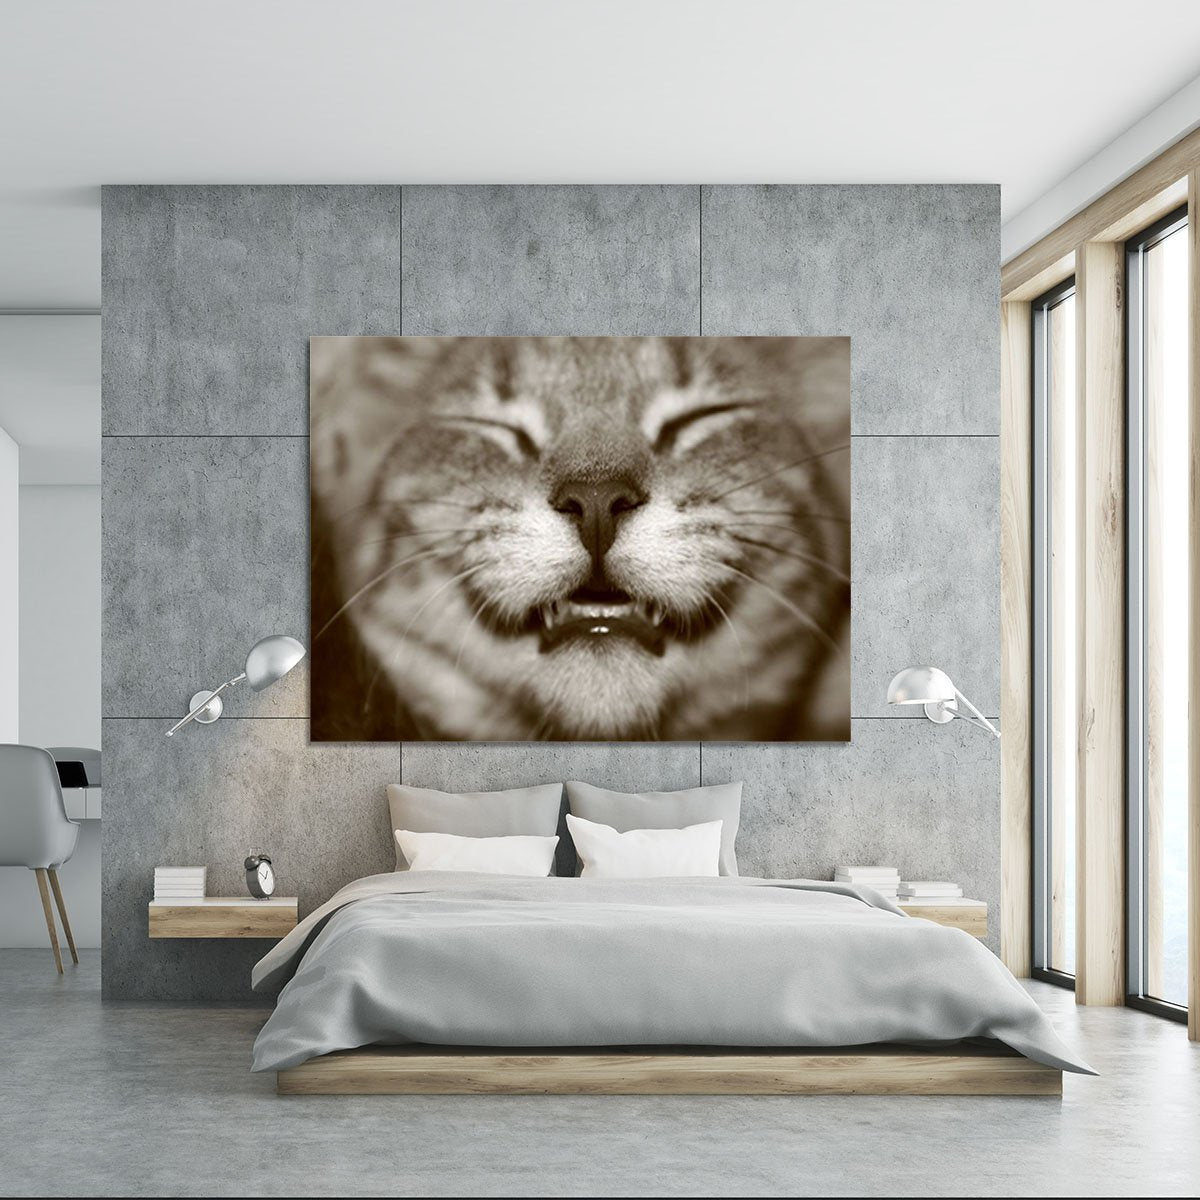 A smiling kitten Canvas Print or Poster